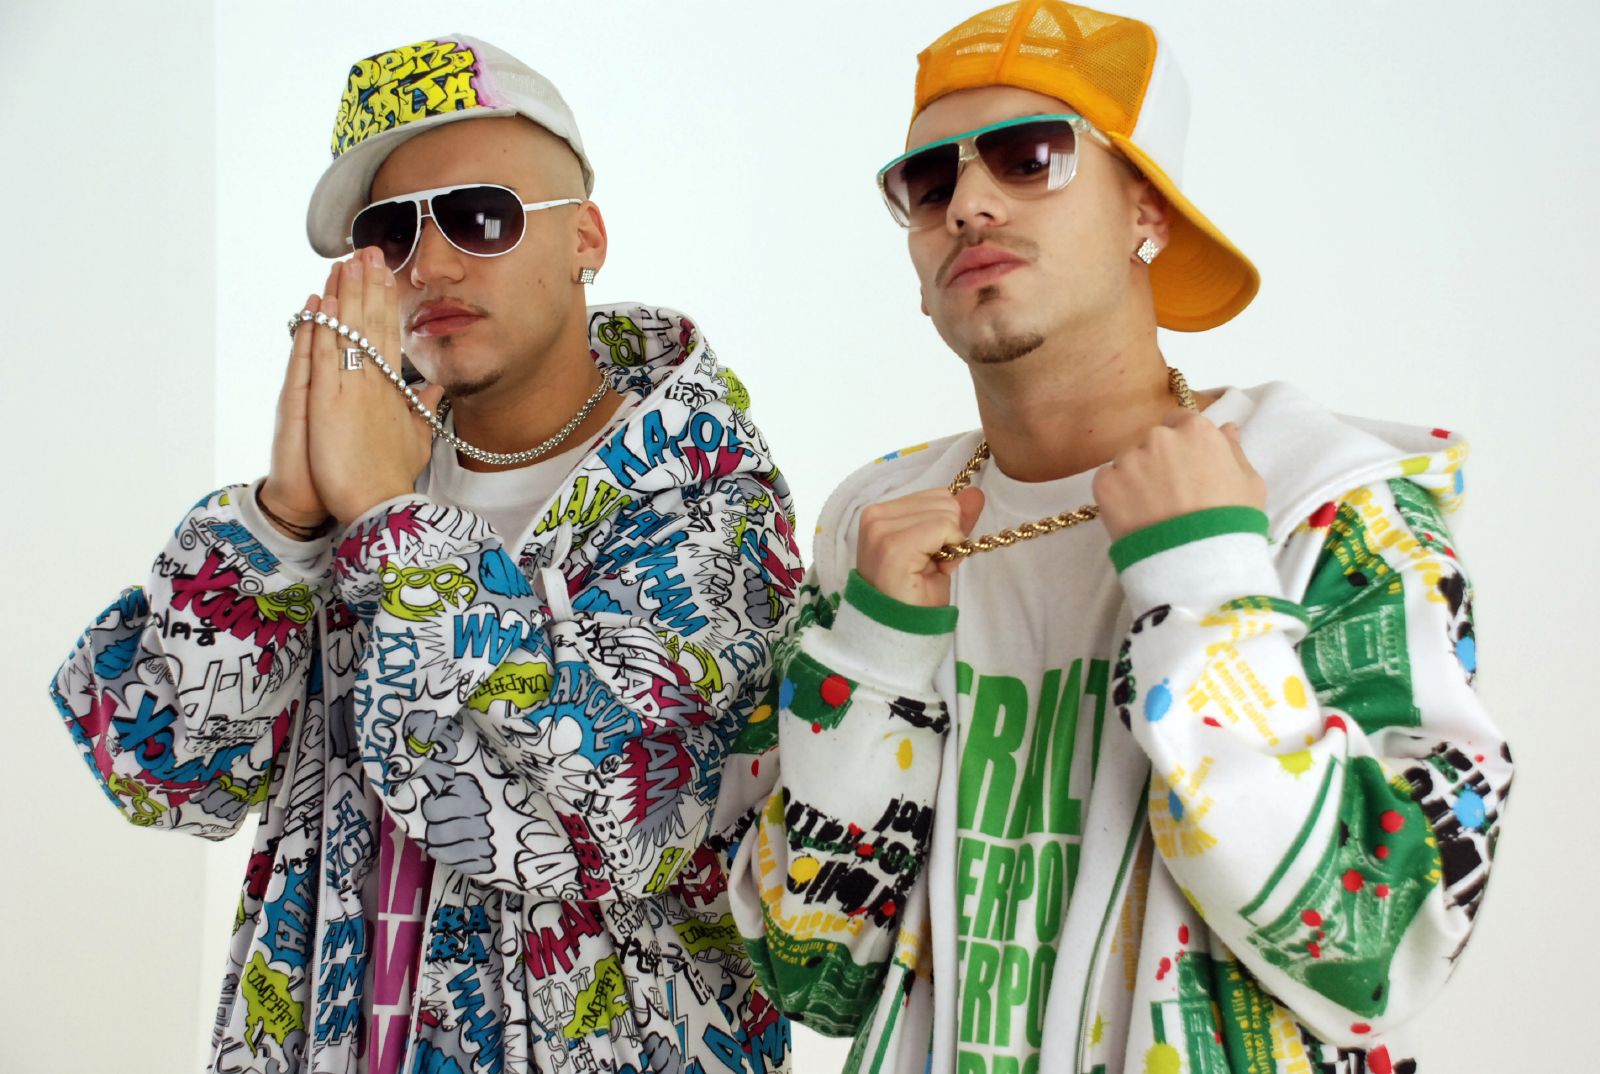 two young men wearing colorful clothes pose for the camera